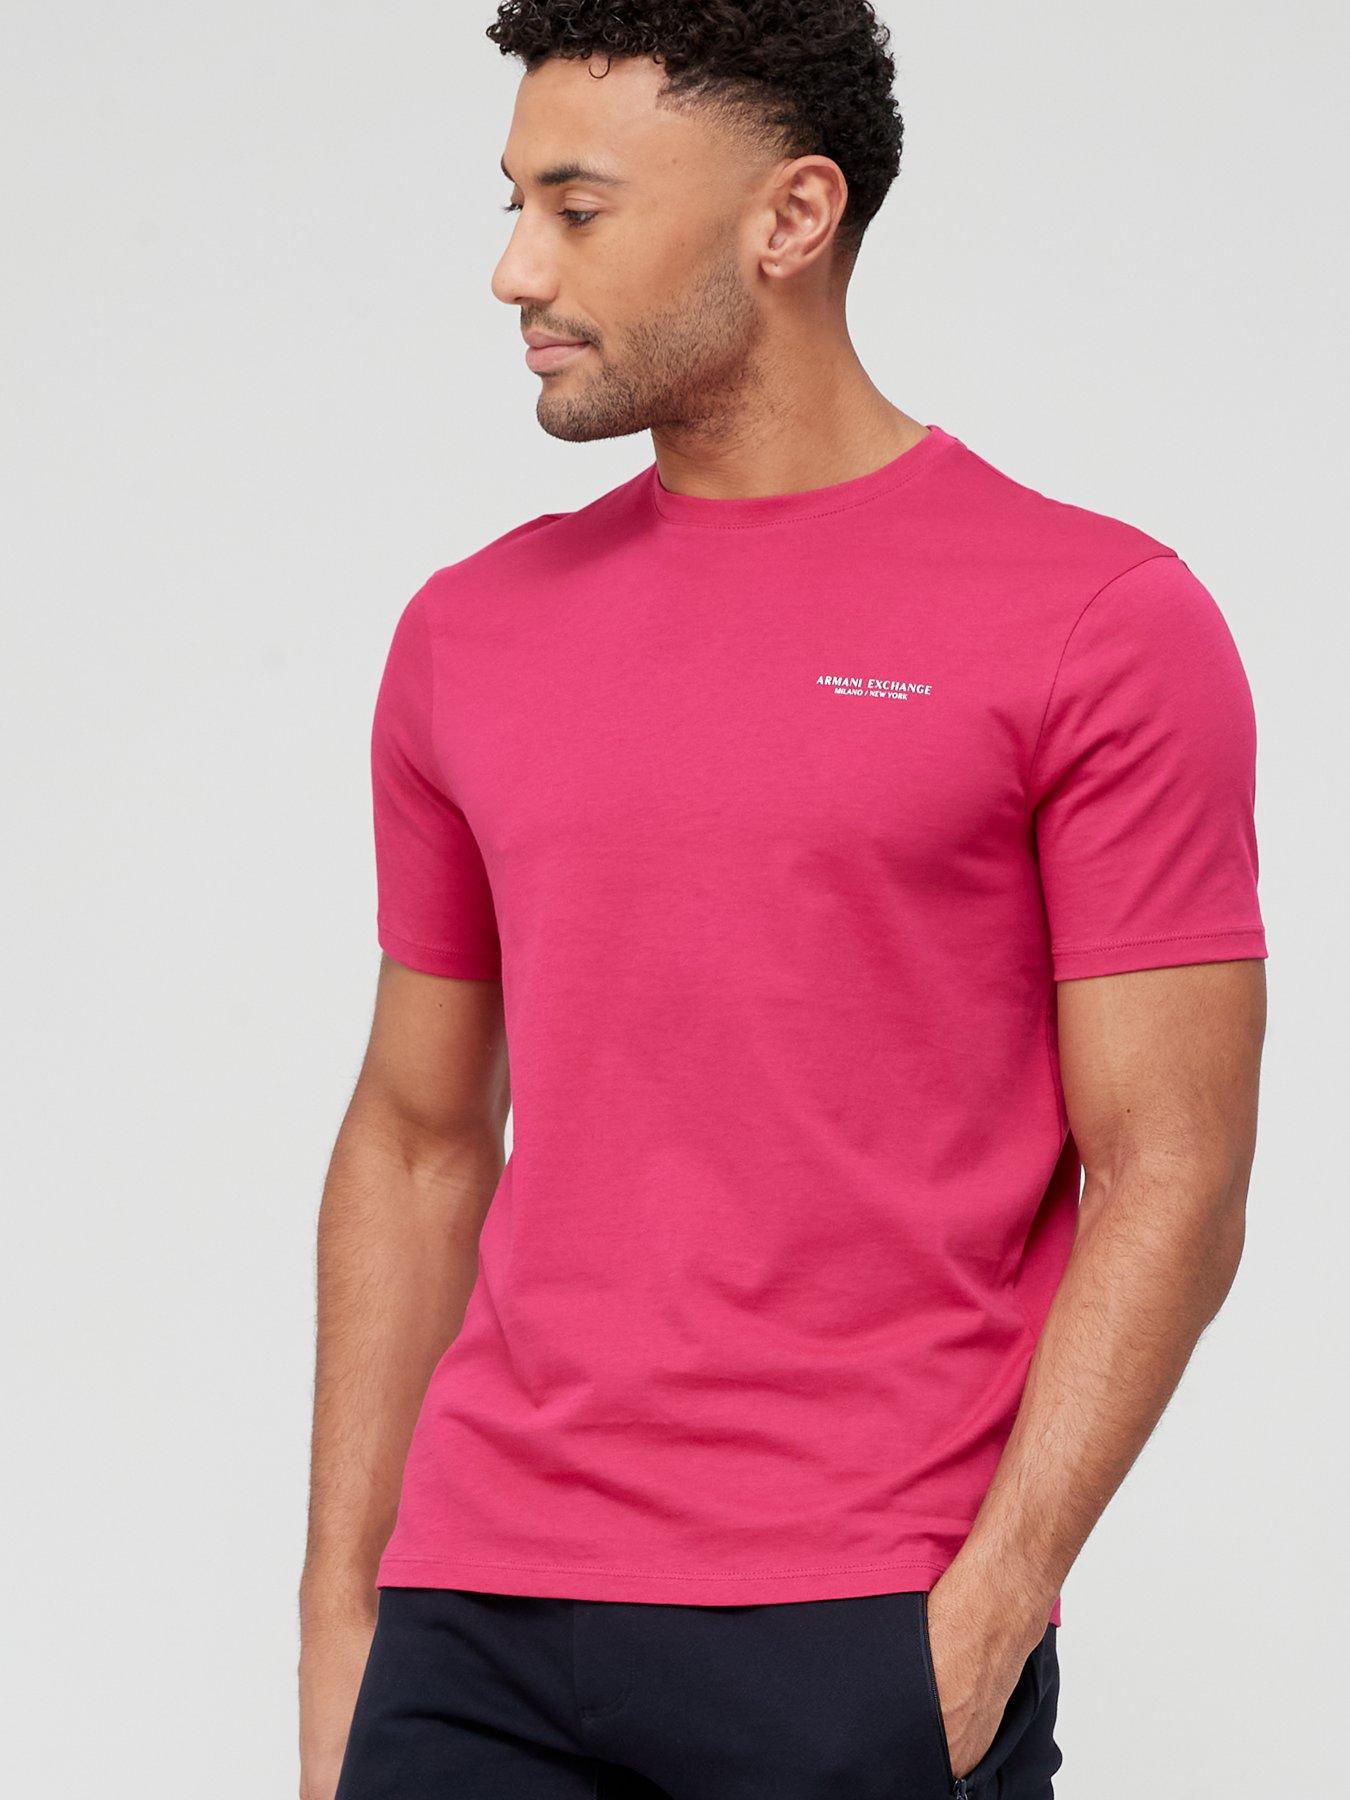 Armani Exchange Small Chest Logo T-Shirt - Pink 